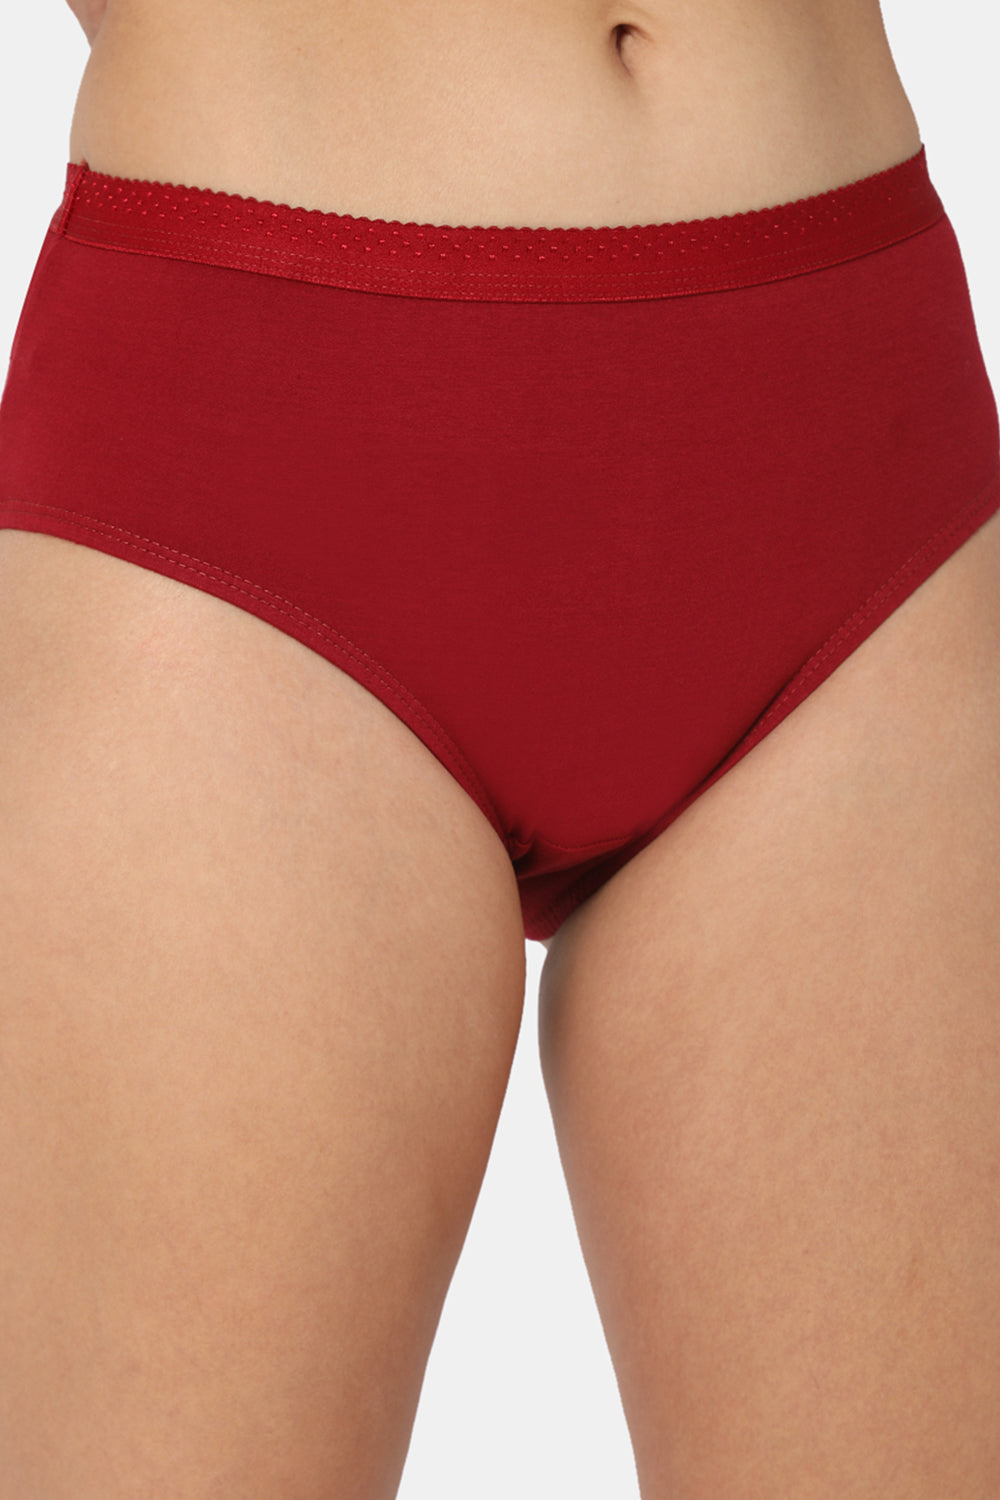 Intimacy Classic Dark Plain Panty - Outer Elastic - Pack of 3